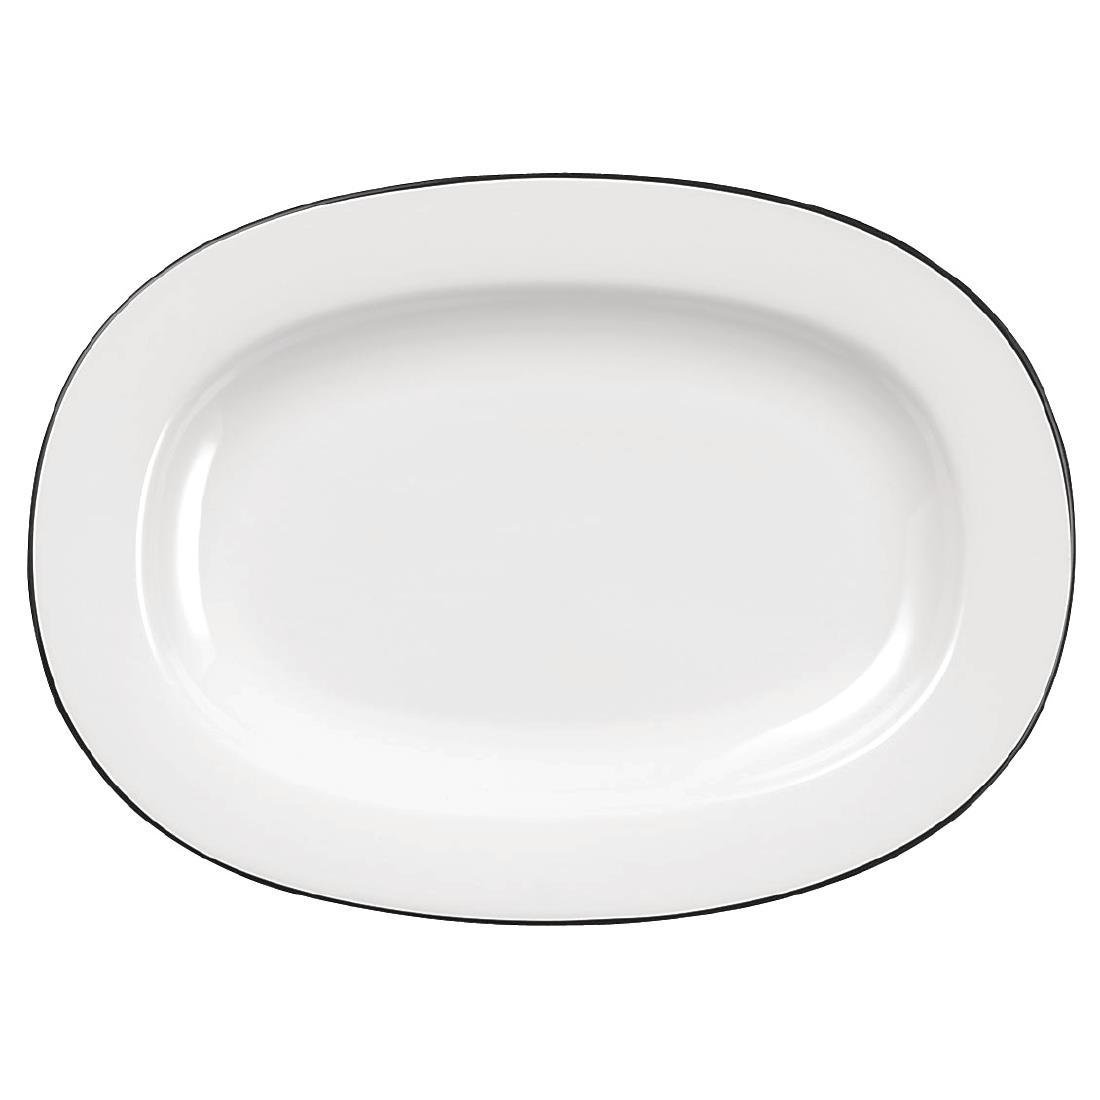 Churchill Alchemy Mono Oval Dishes 280mm (Pack of 6) - W565  - 1